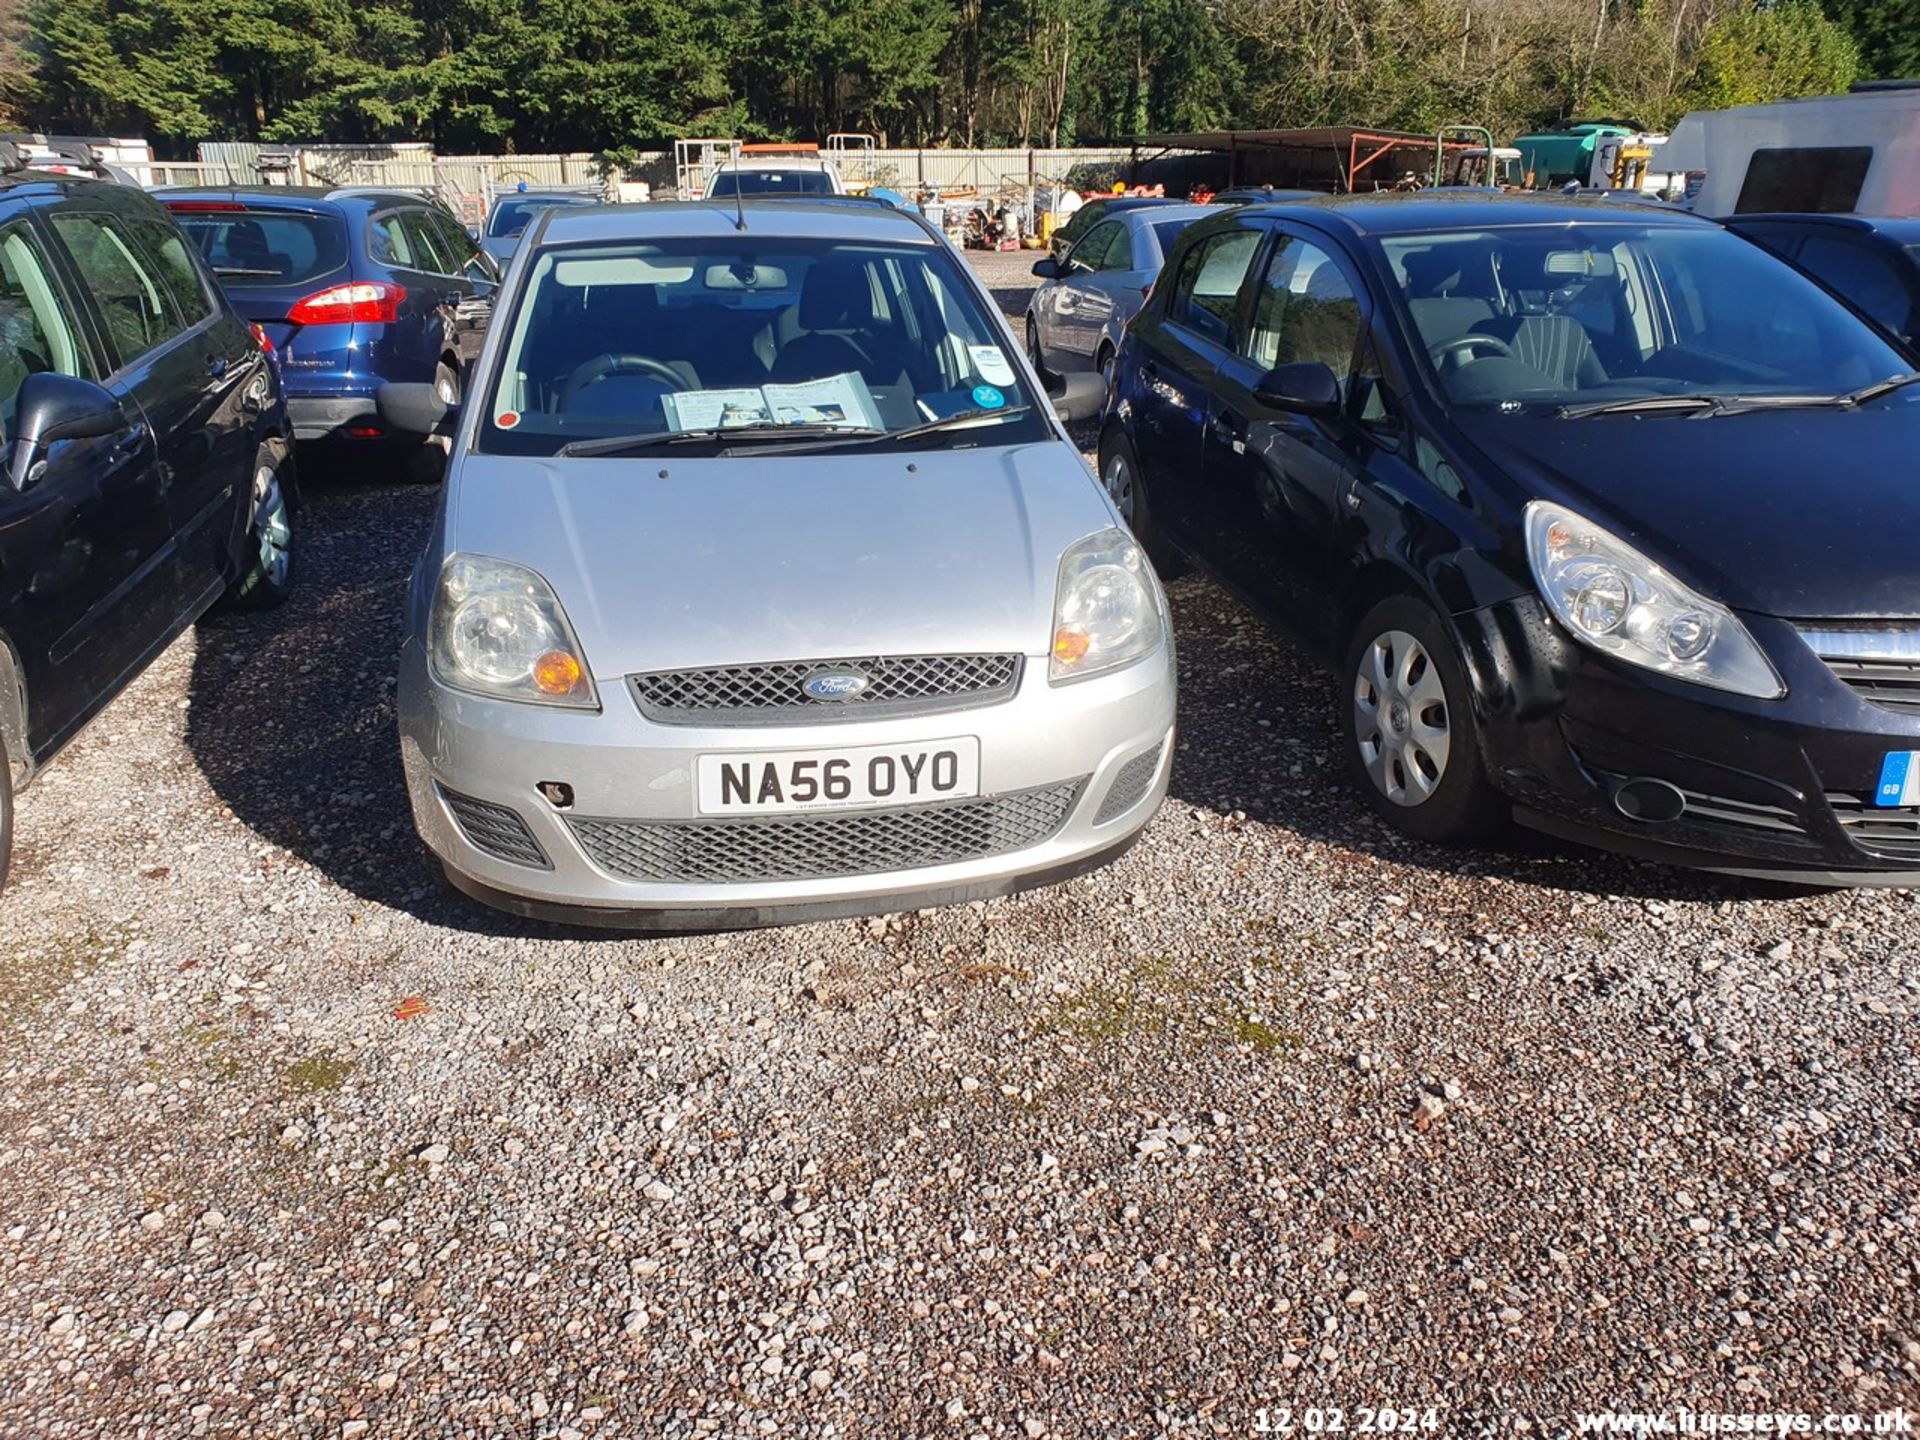 06/56 FORD FIESTA STYLE TDCI - 1399cc 5dr Hatchback (Silver) - Image 6 of 39